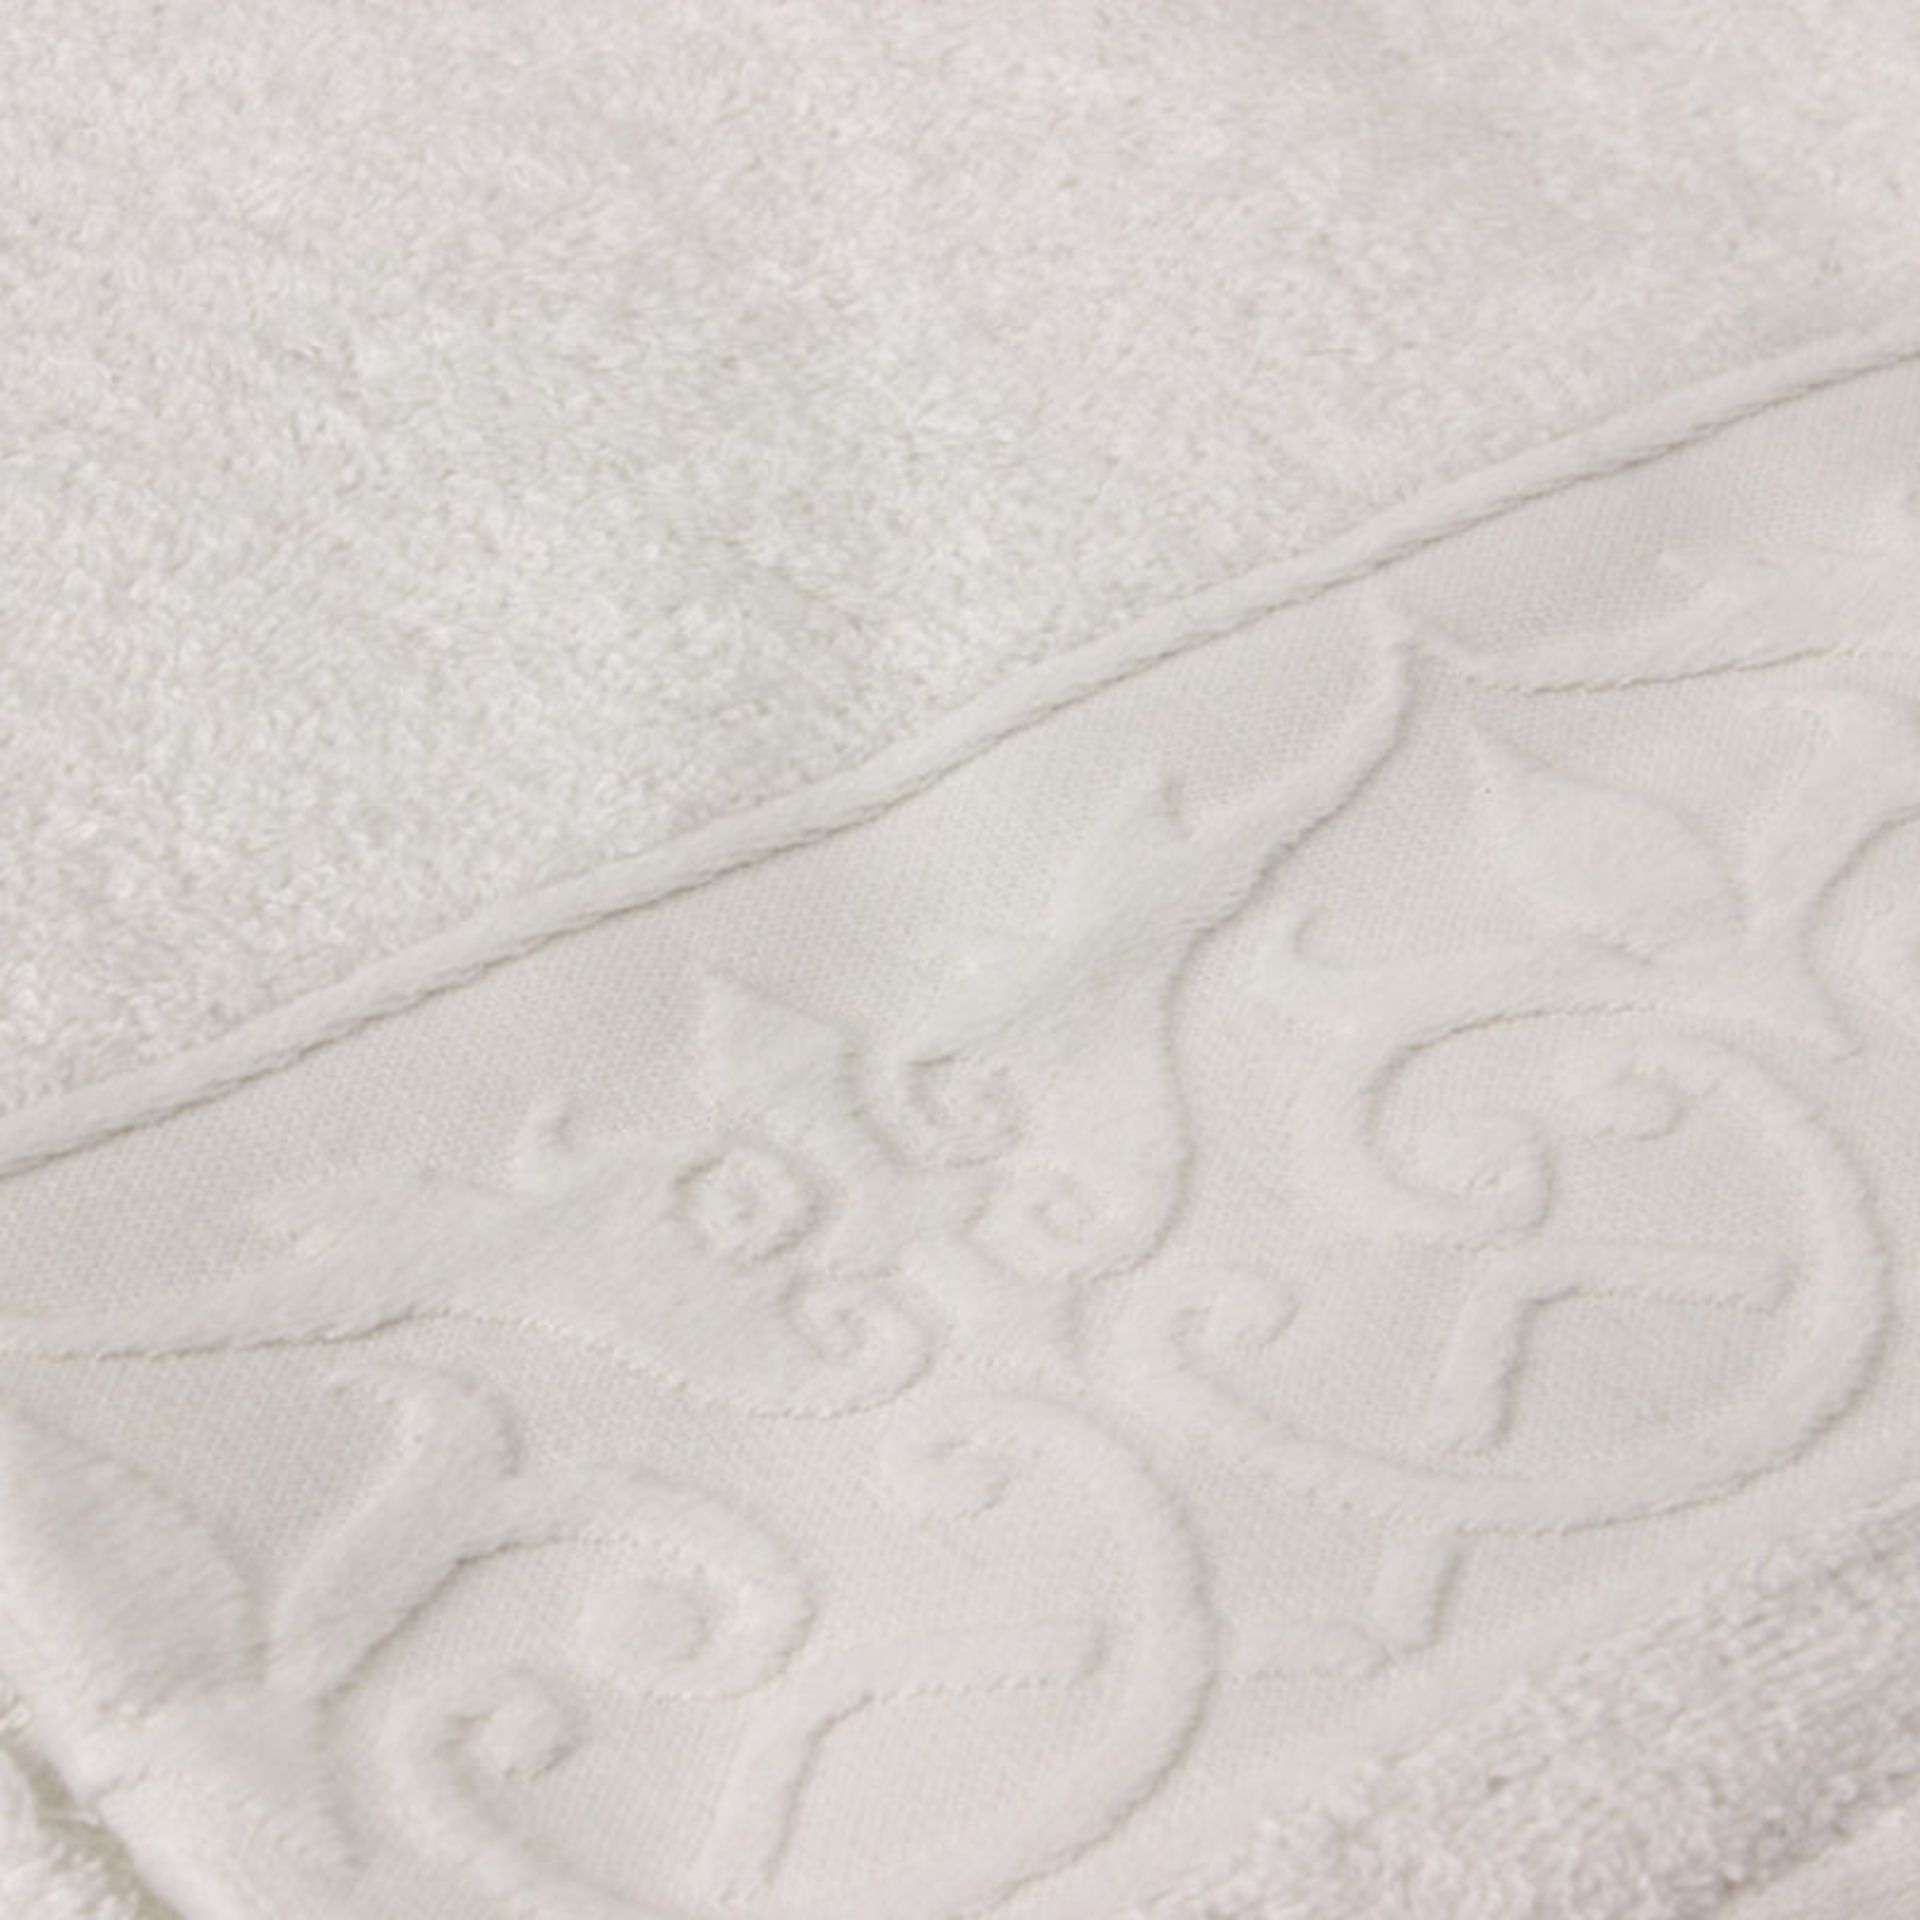 V *TRADE QTY* Brand New Frette Italian White Bath Towel With Embossed Pattern X 4 YOUR BID PRICE